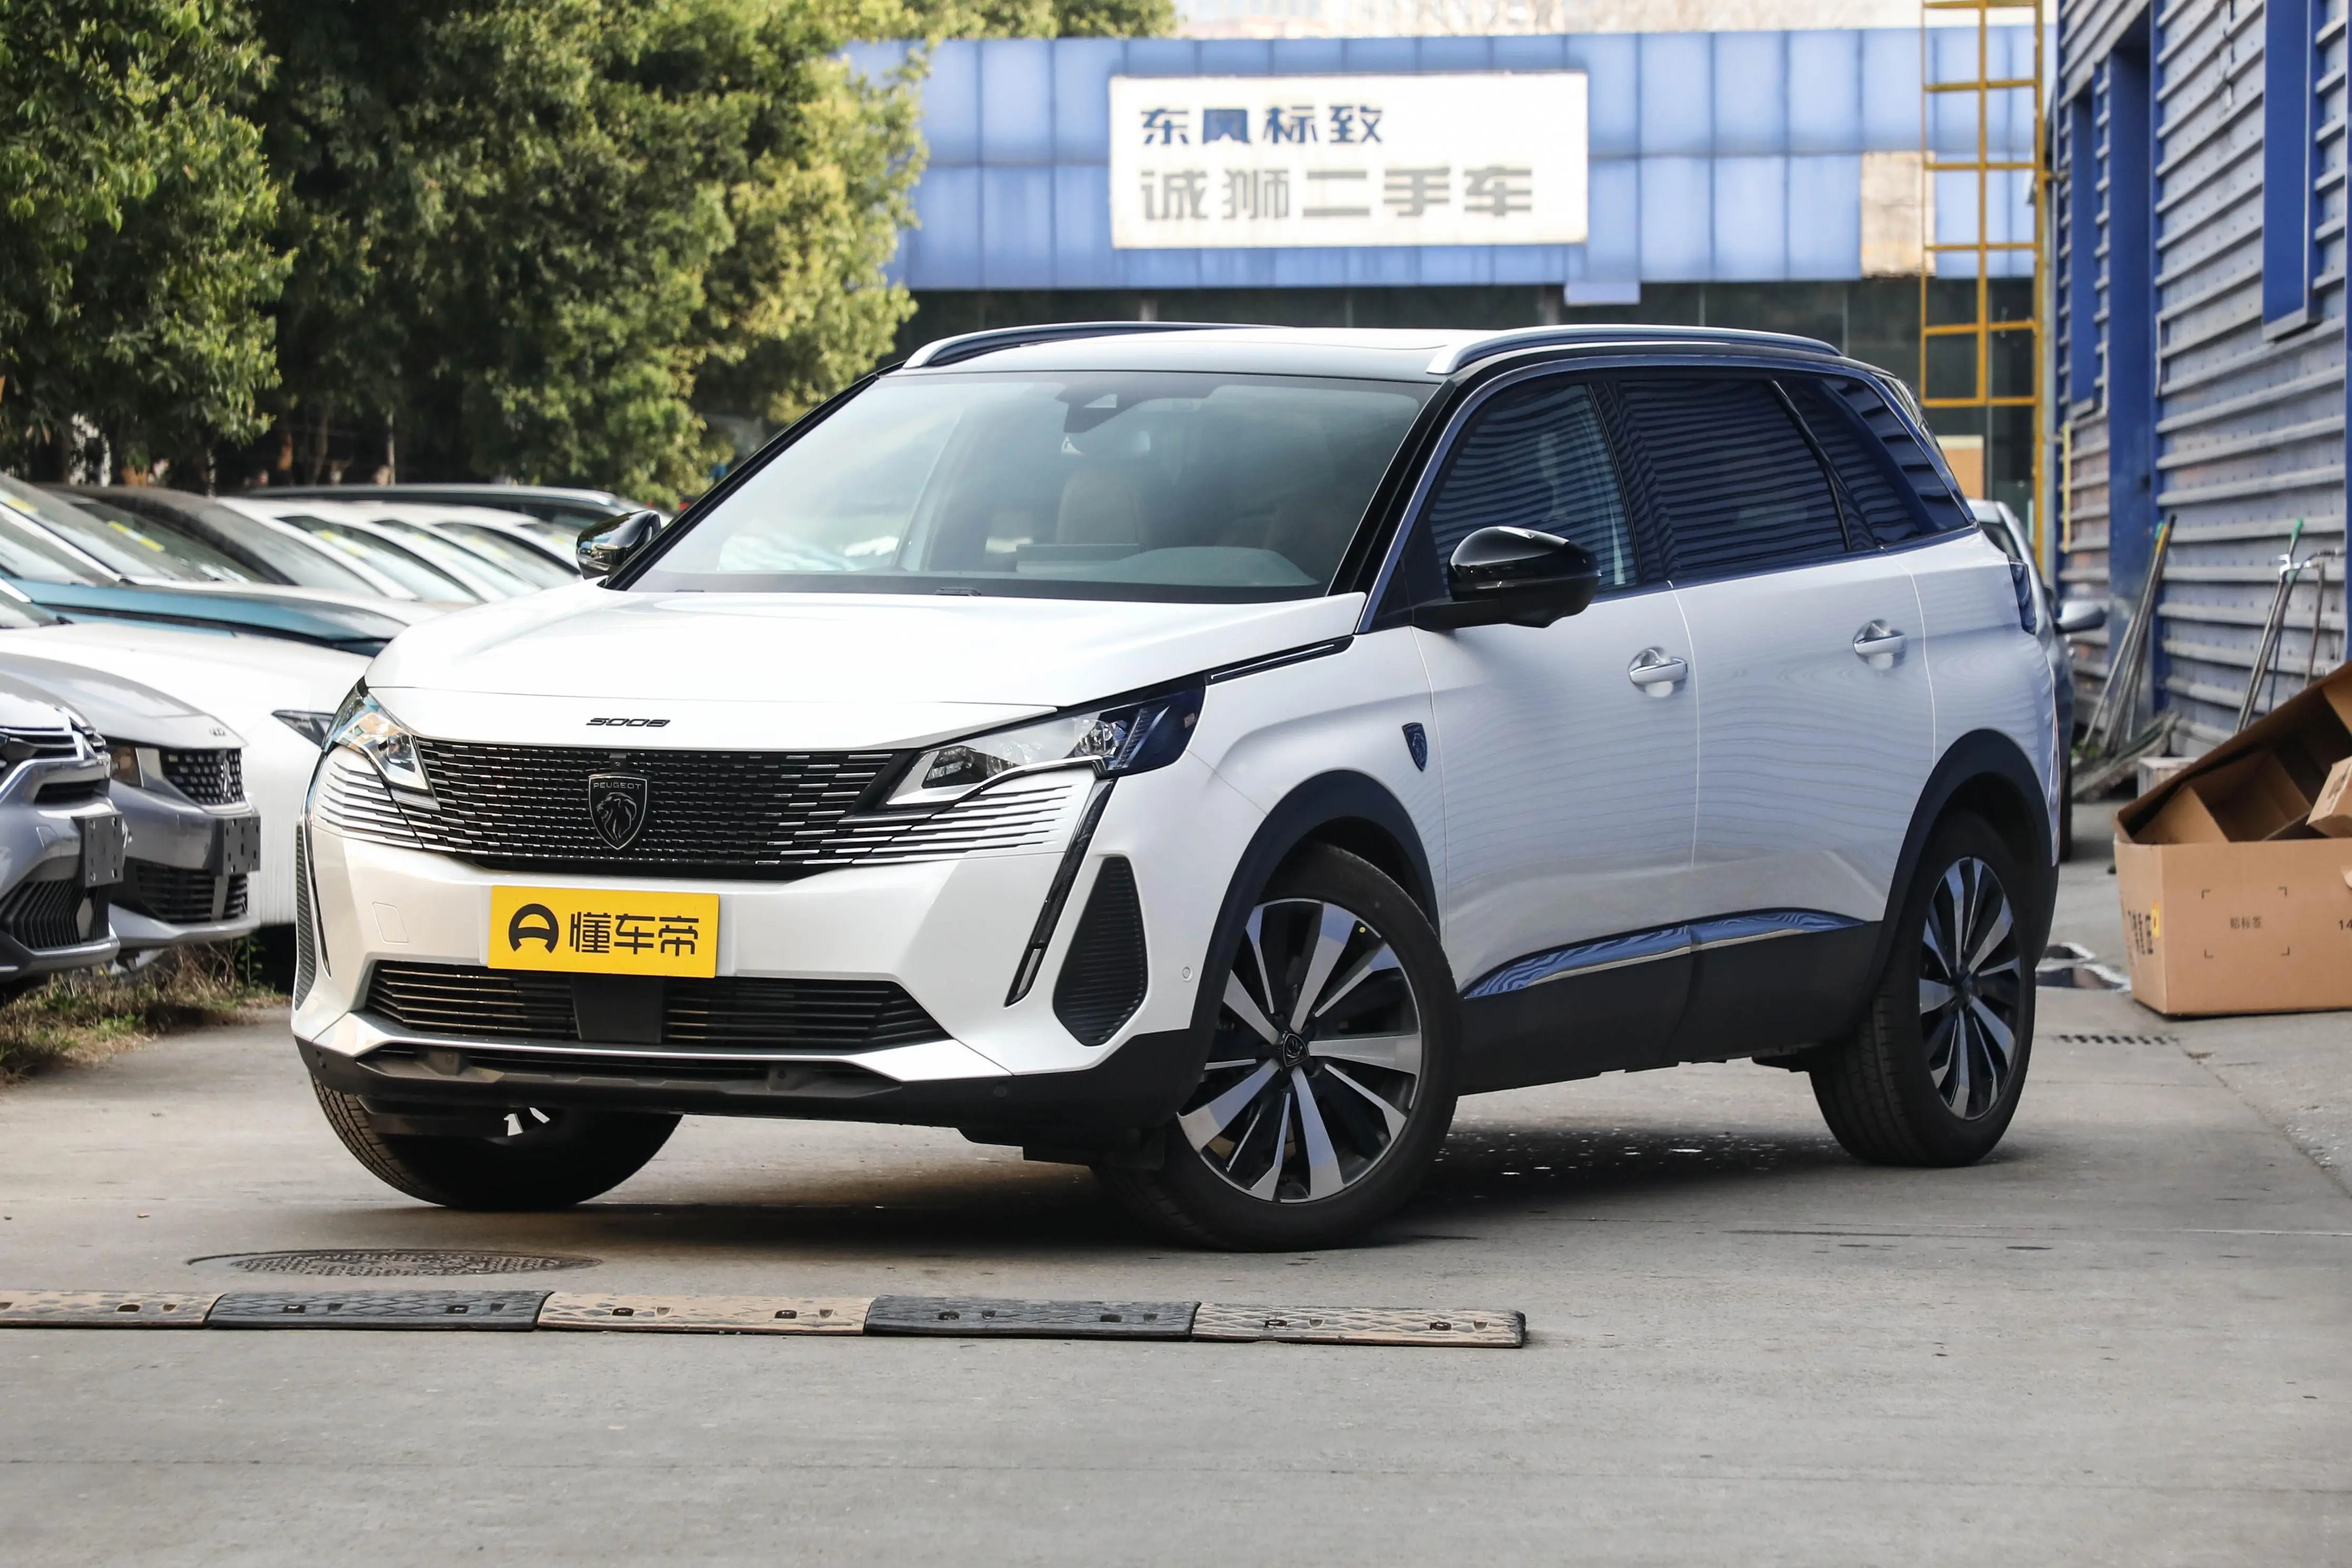 New Dongfeng Peugeot 5008 model with updated configuration priced at $32K